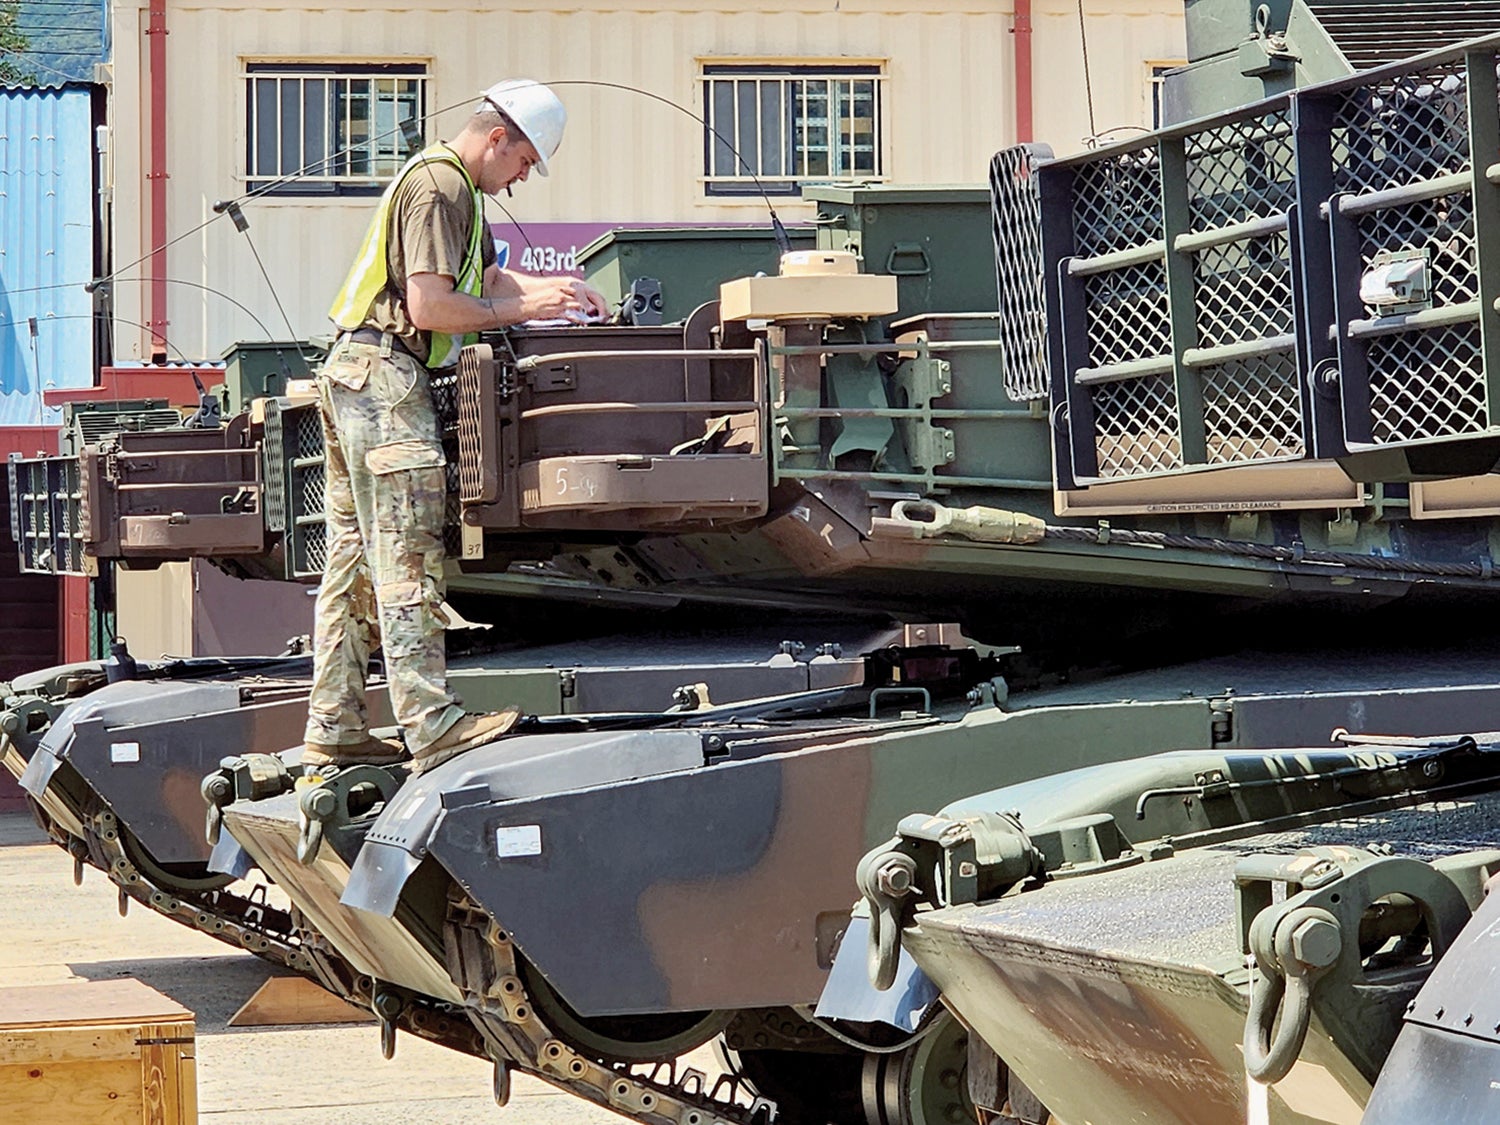 A soldier from the 1st Battalion, 77th Armor Regiment, conducts inventory and preventive maintenance checks on an M1A2 Abrams tank. (Credit: U.S. Army/Capt. Nathan Mumford)